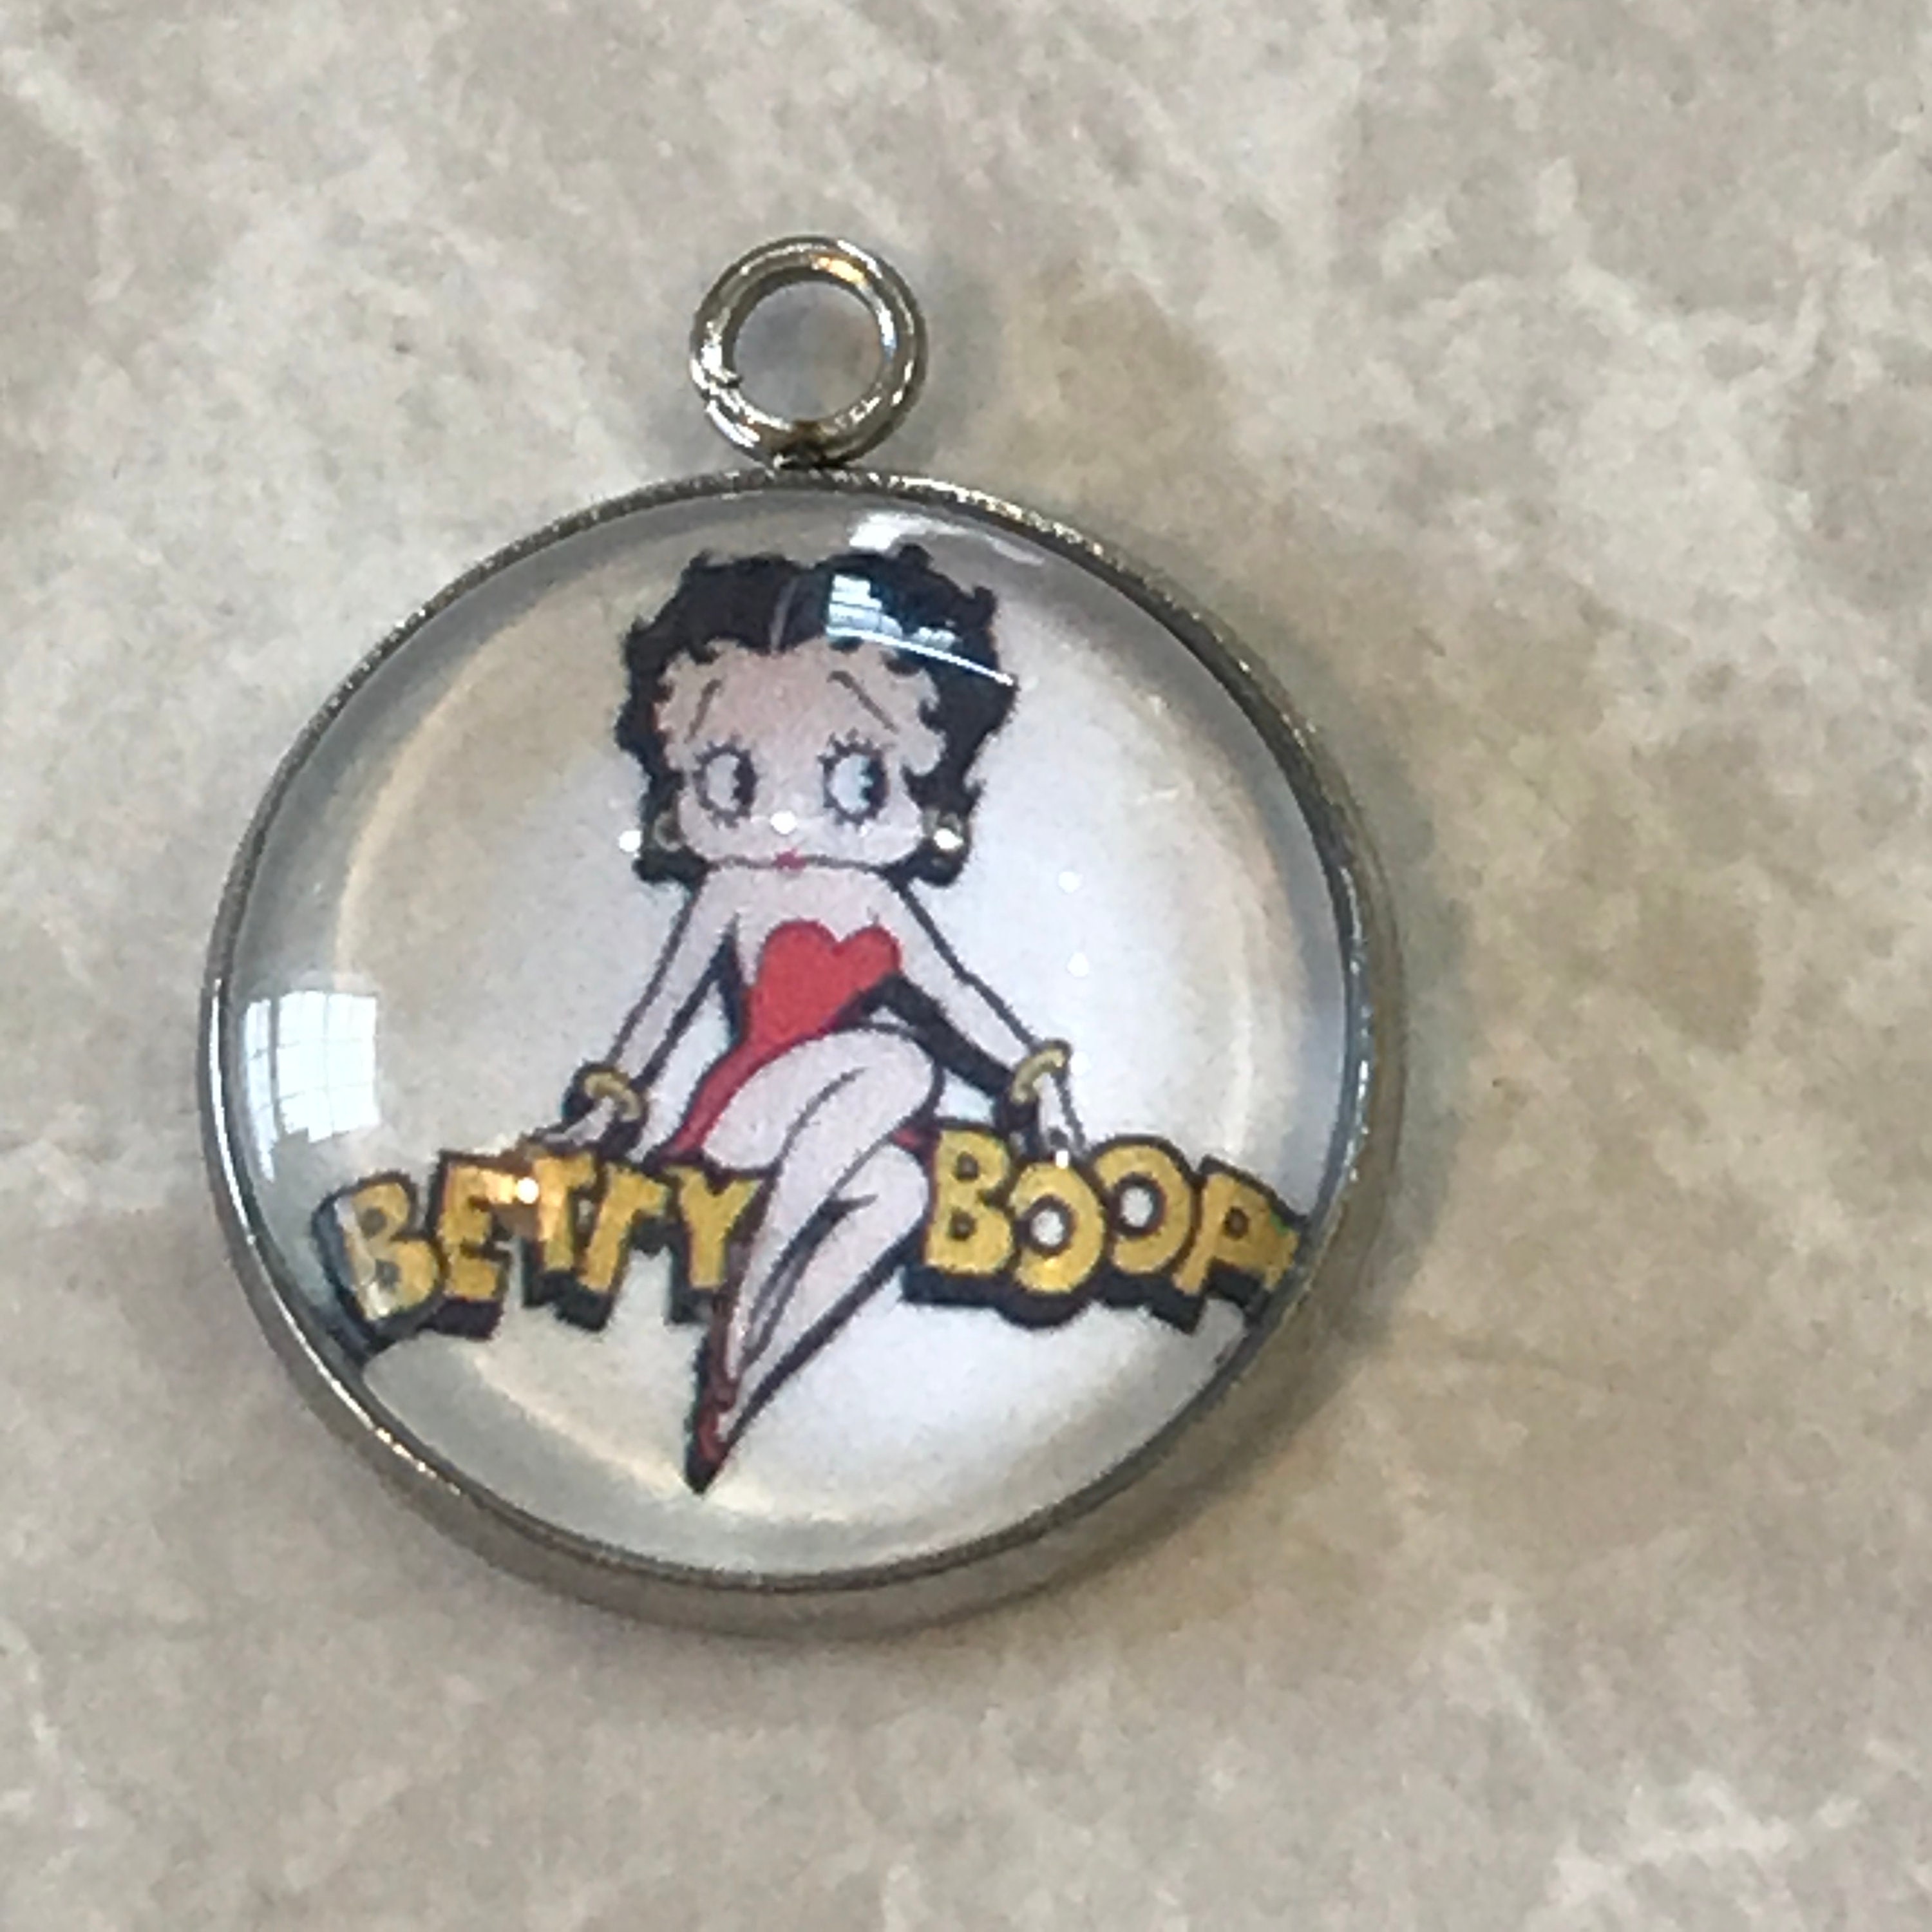 Choose your favourite Betty Boop Novelty Charm Pendant Bookmark Organza Bag 